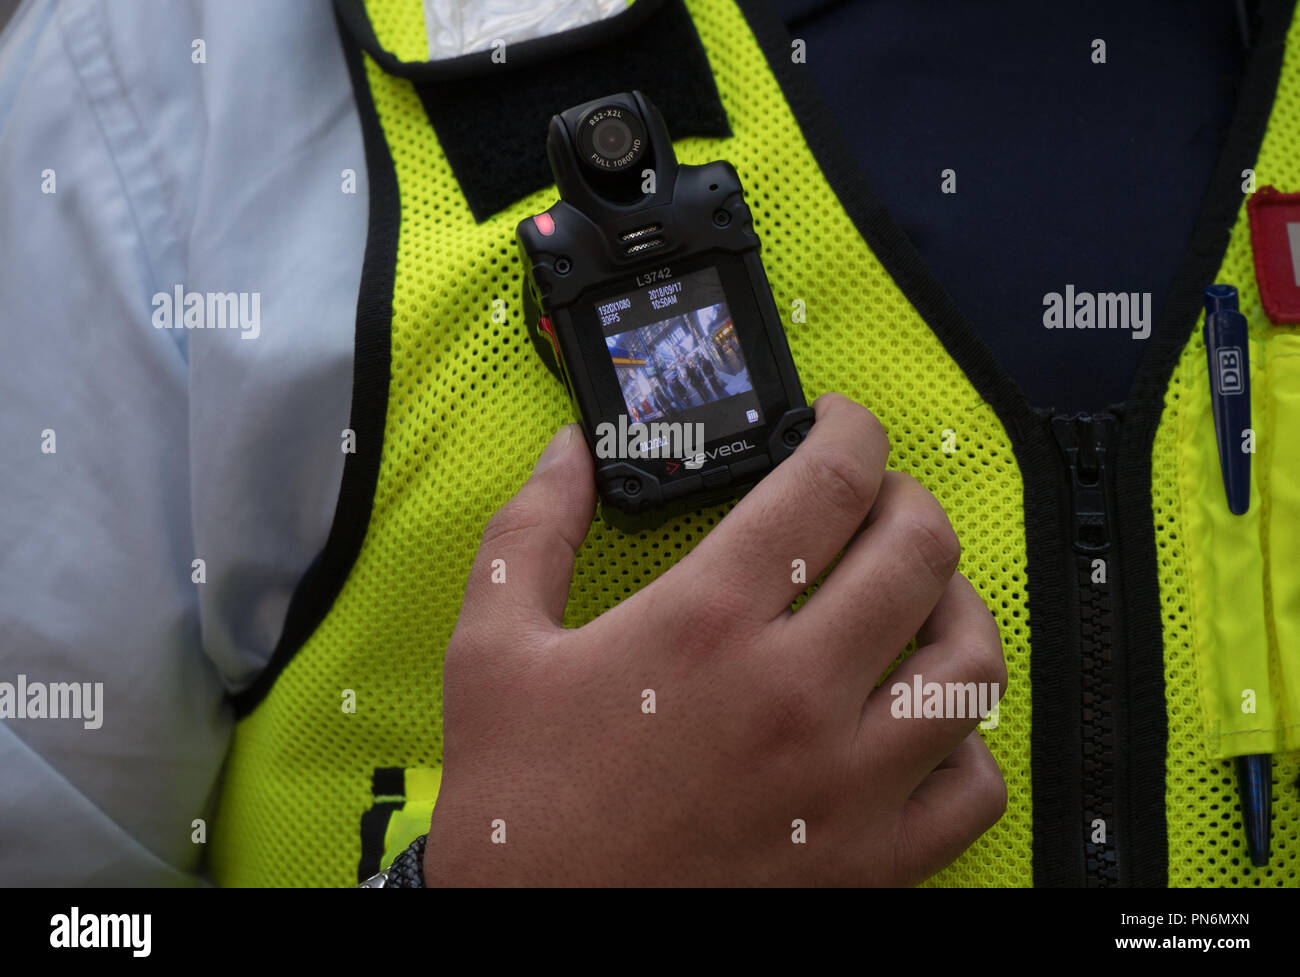 17 September 2018, Hessen, Frankfurt/M.: A DB security officer switches on  the body cam at the main station. Since the beginning of September, Deutsche  Bahn security forces have been using mini cameras